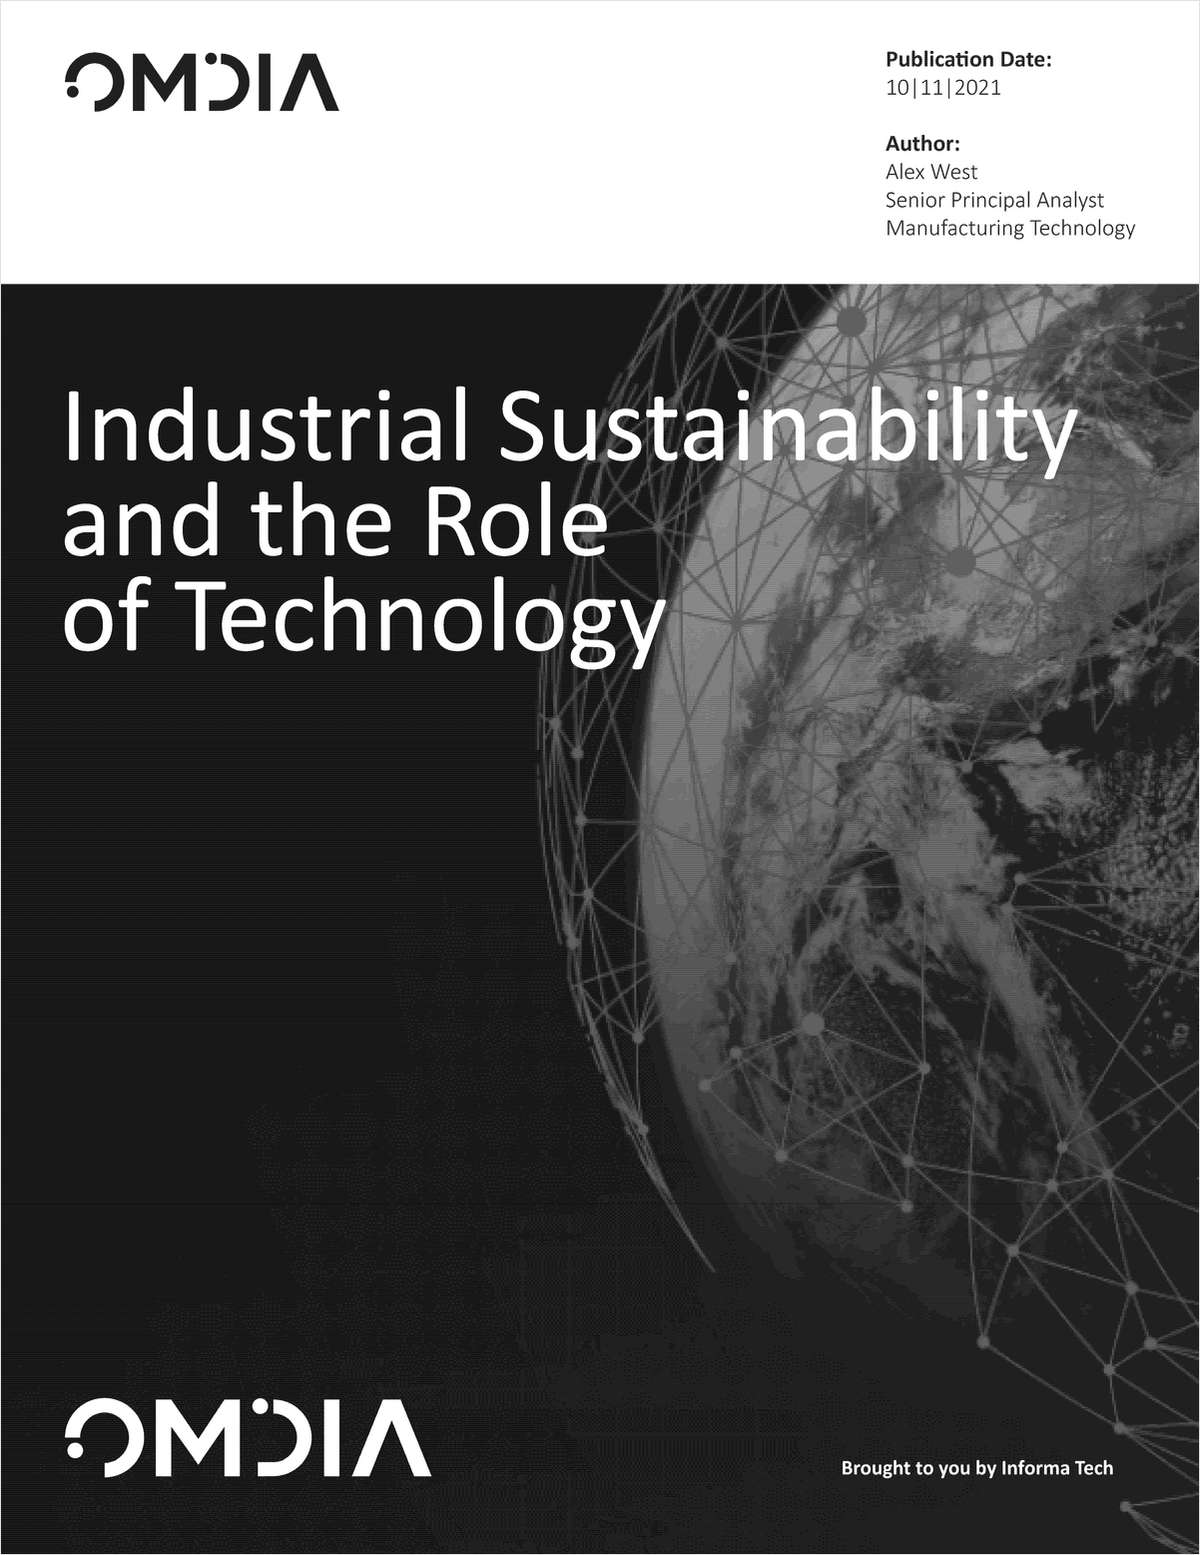 Digital Transformation and Industrial Sustainability Meeting the Triple Bottom Line